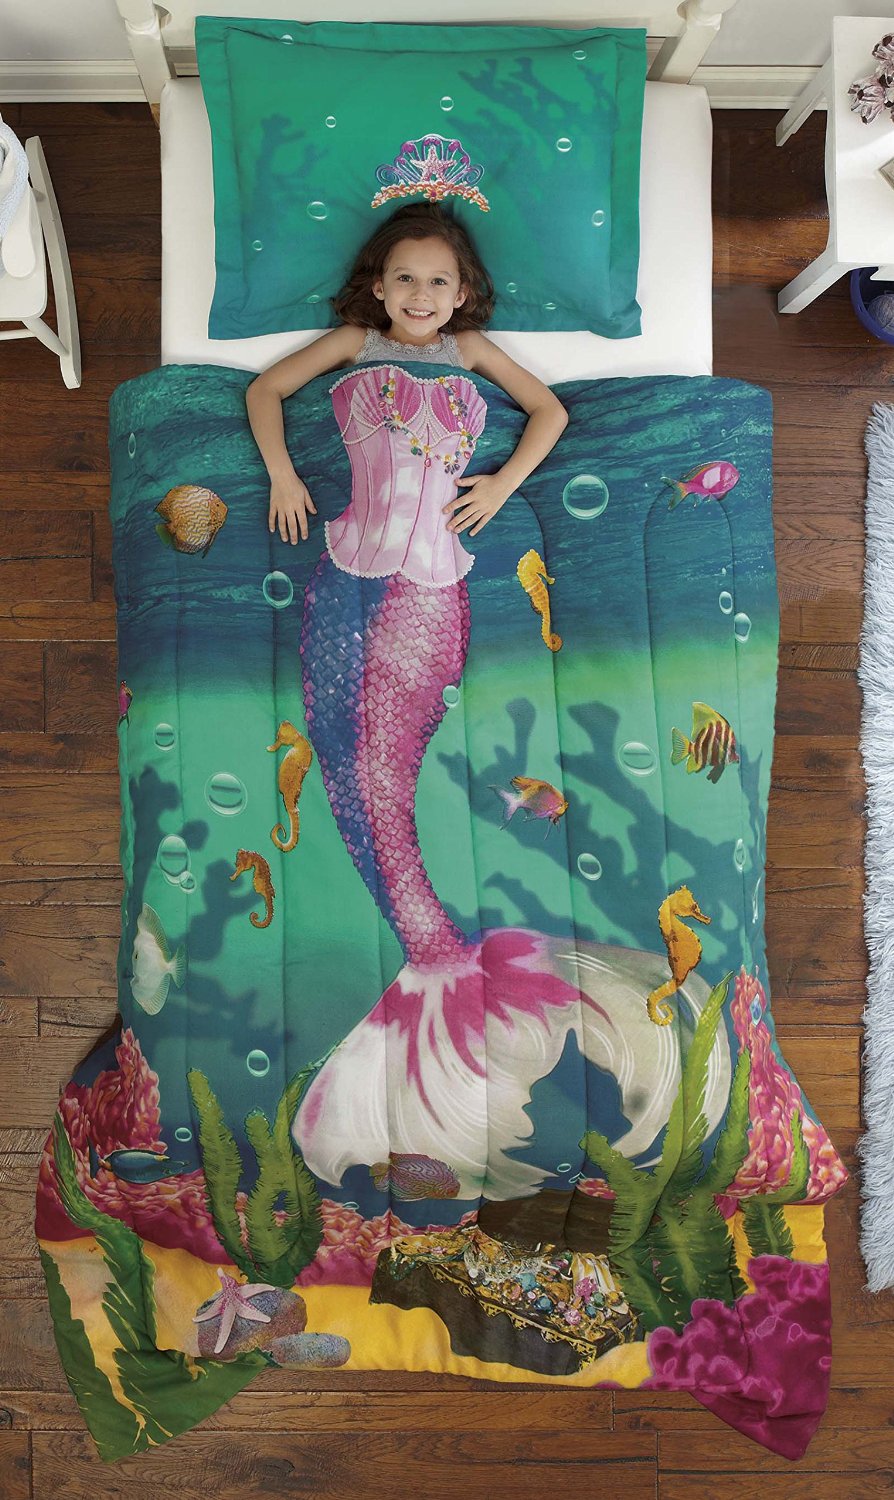 LOVE this! Mermaid bedding for a little girls bedroom - makes her look like a mermaid while she sleeps!